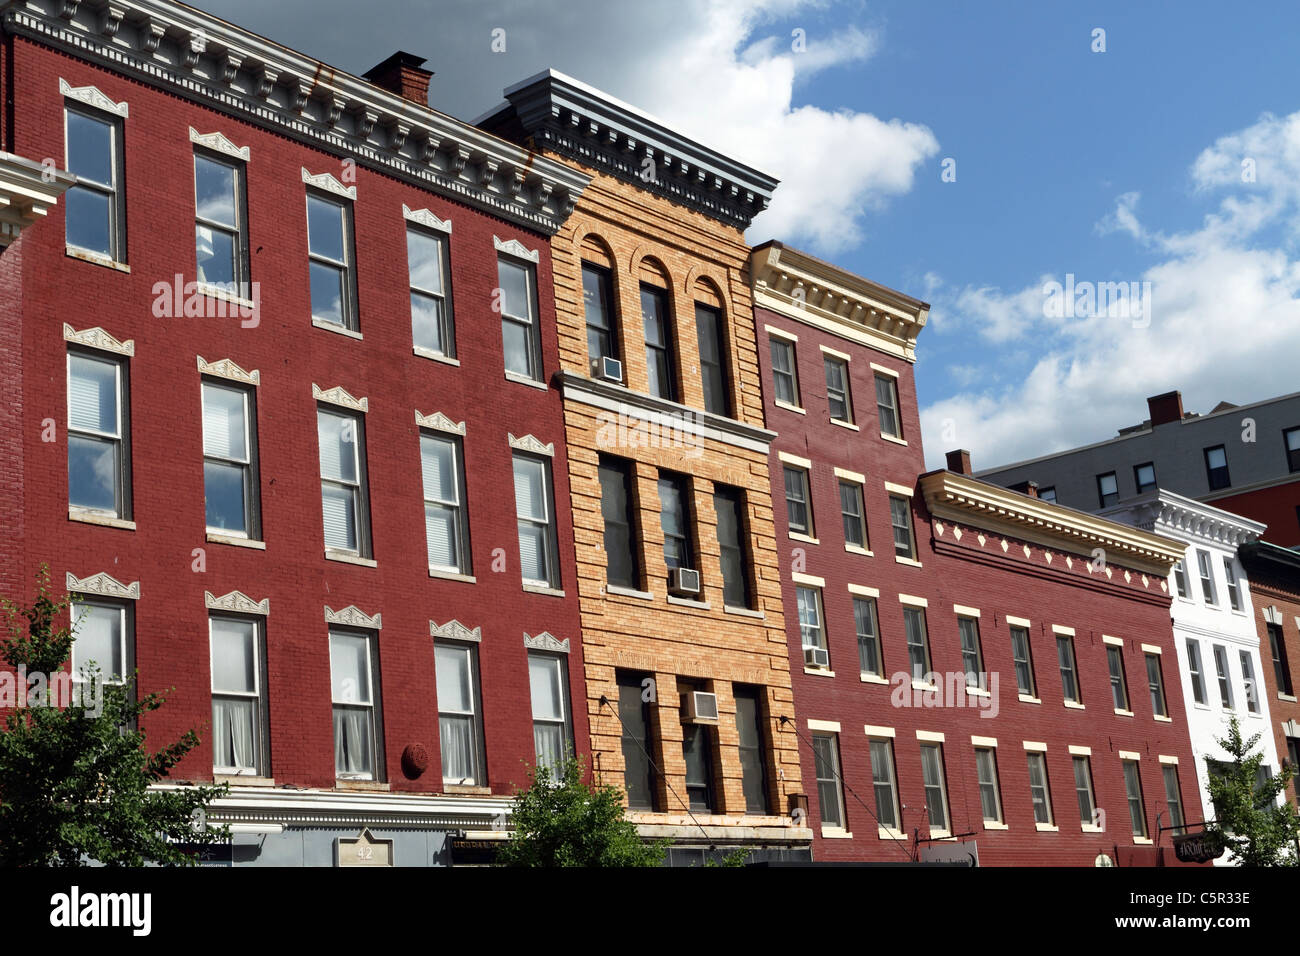 Examples of architecture in downtown Bangor, Maine, USA. Stock Photo